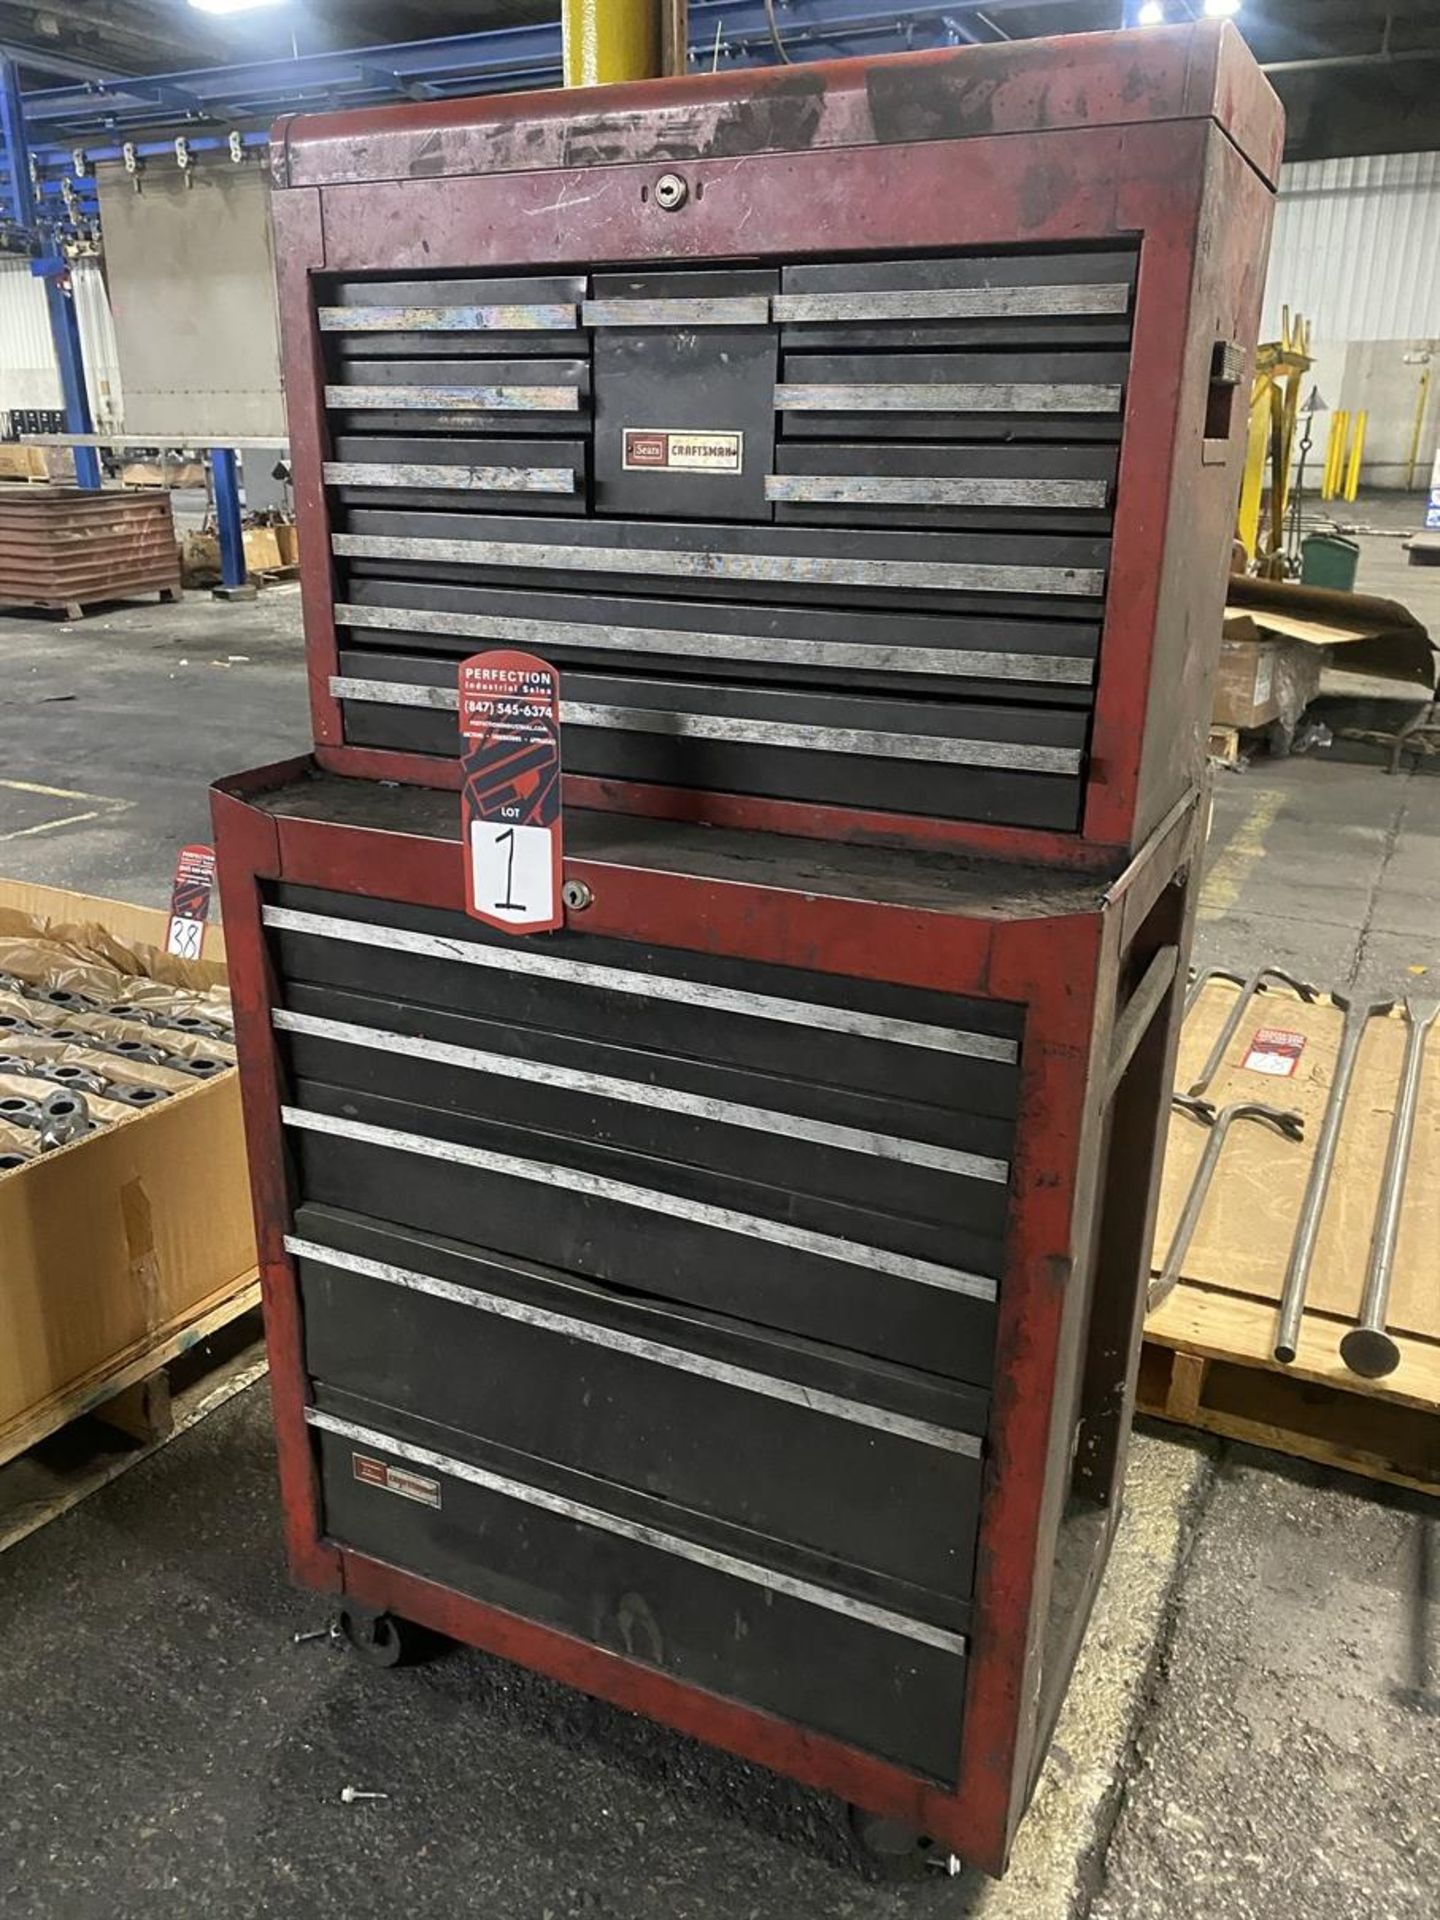 Sears/Craftsman Rolling Tool Chest